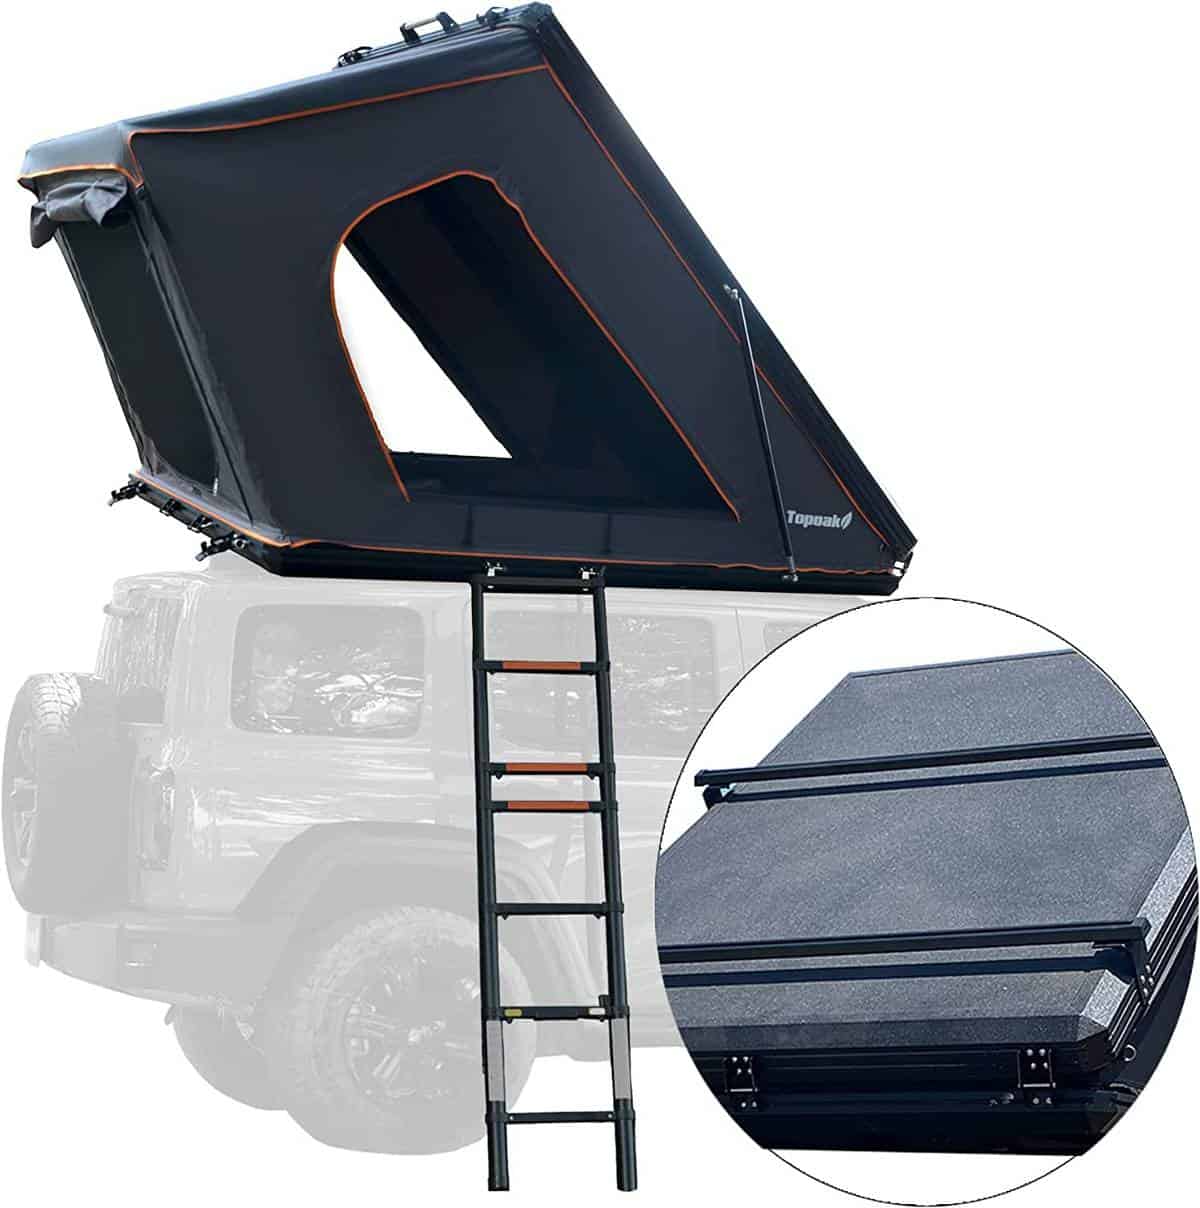 The Topoak Pop Up Rooftop Tent displayed with ladder atop vehicle.